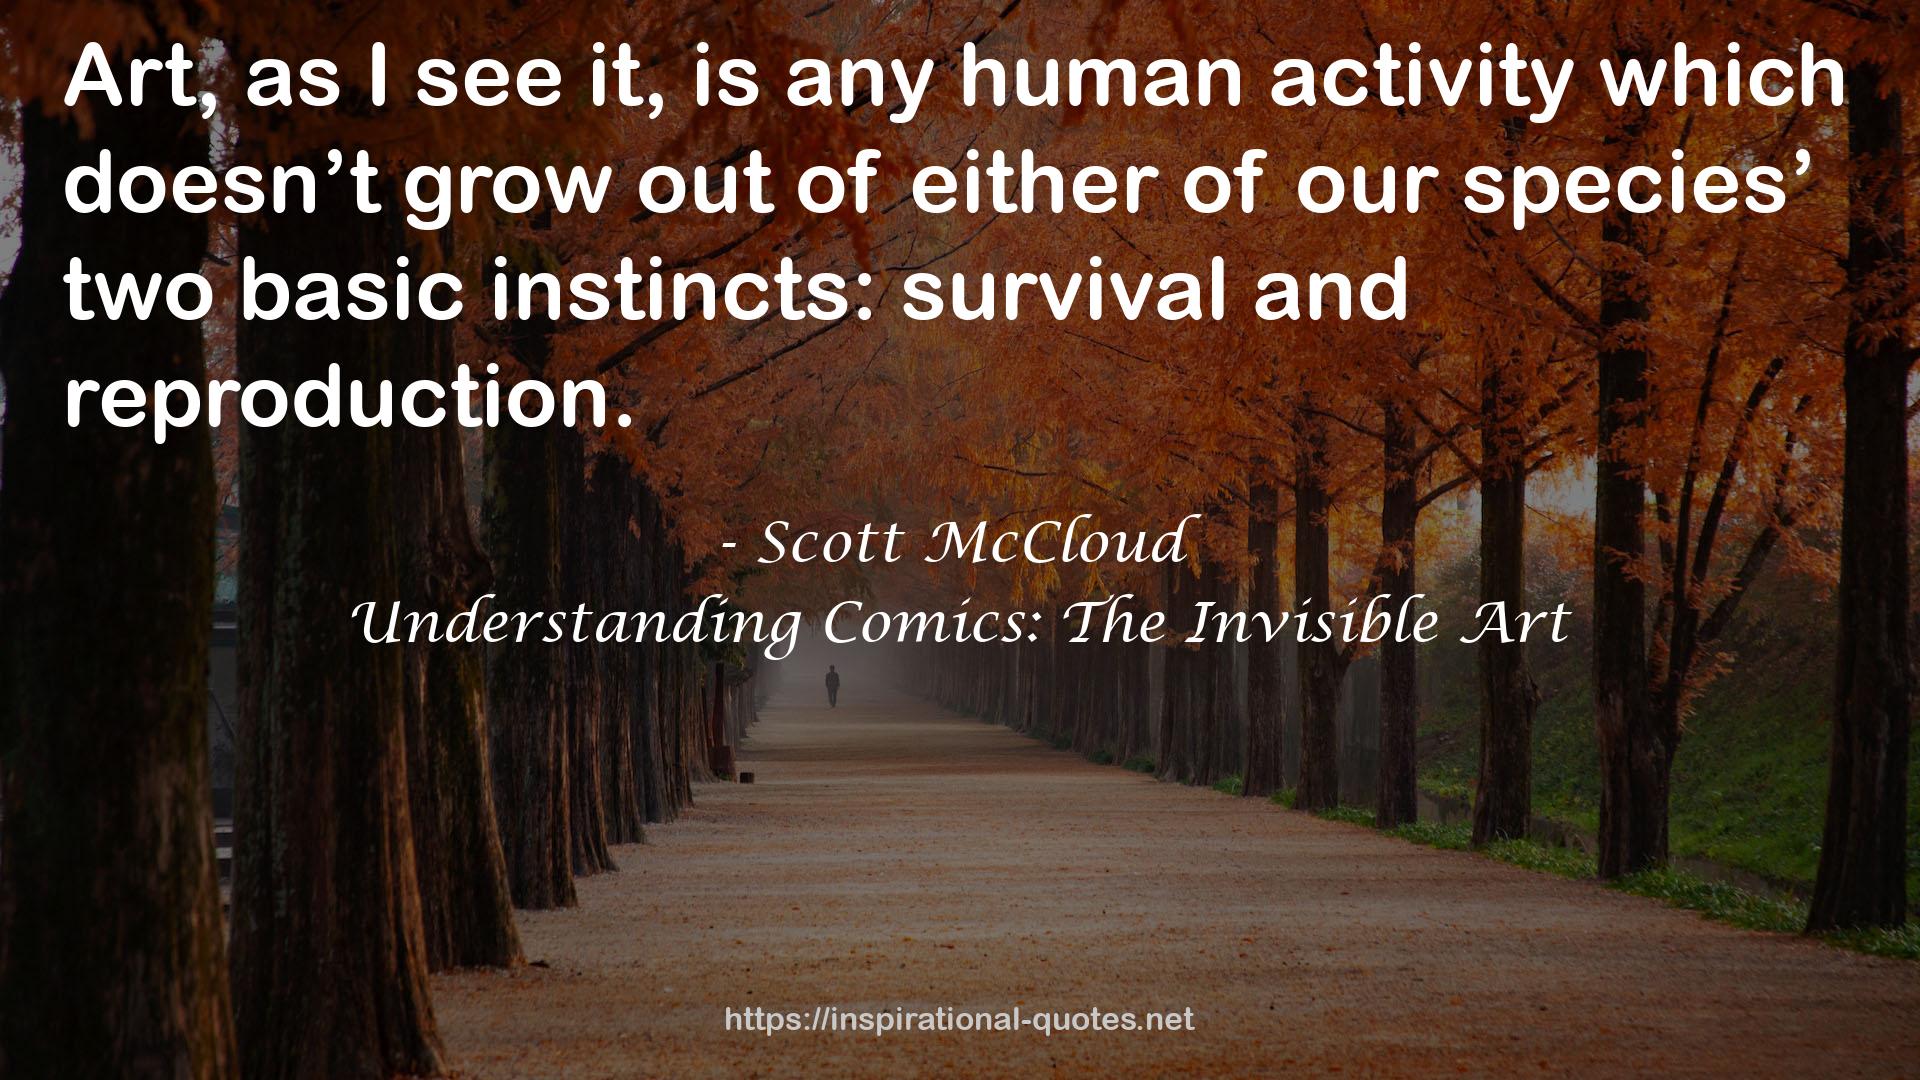 Understanding Comics: The Invisible Art QUOTES